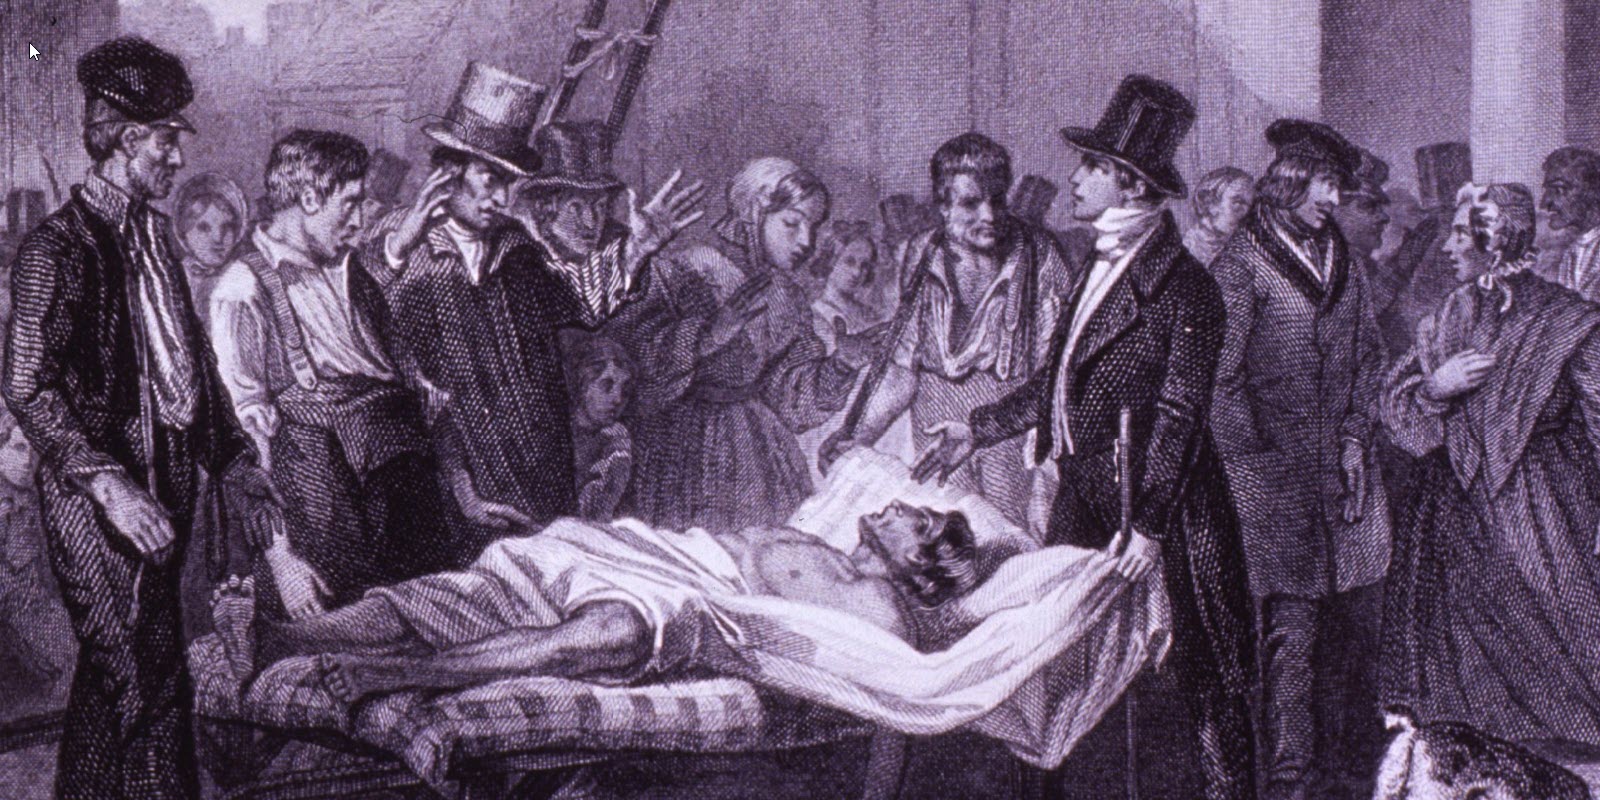 A large group of onlookers discuss a man with cholera.